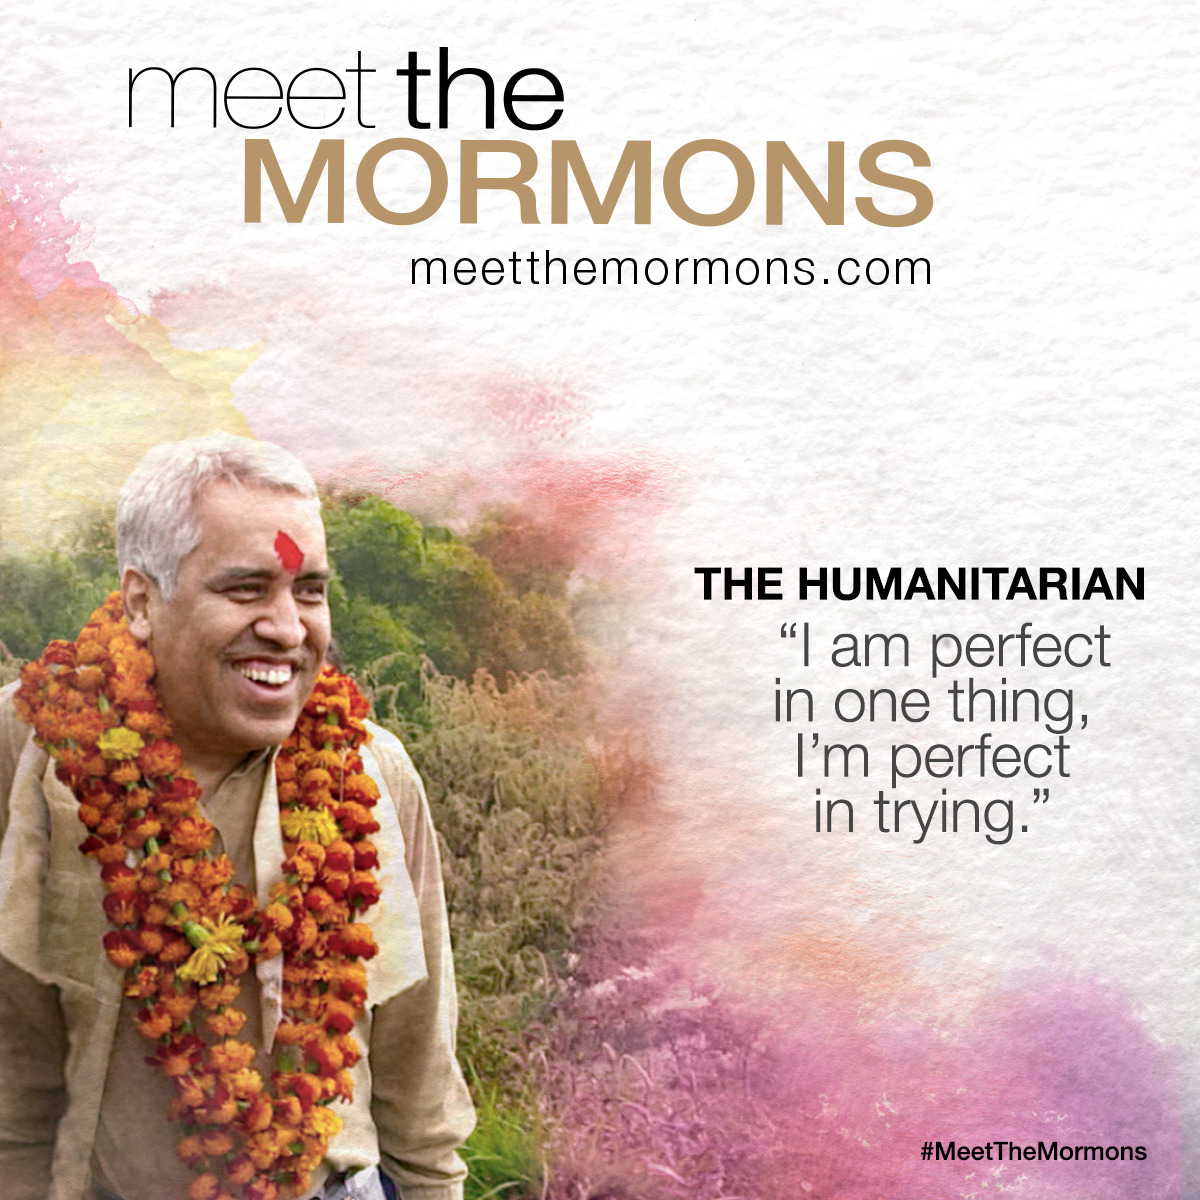 See Meet the Mormons in select theaters October 10th. 

#meetthemormons #sharegoodness